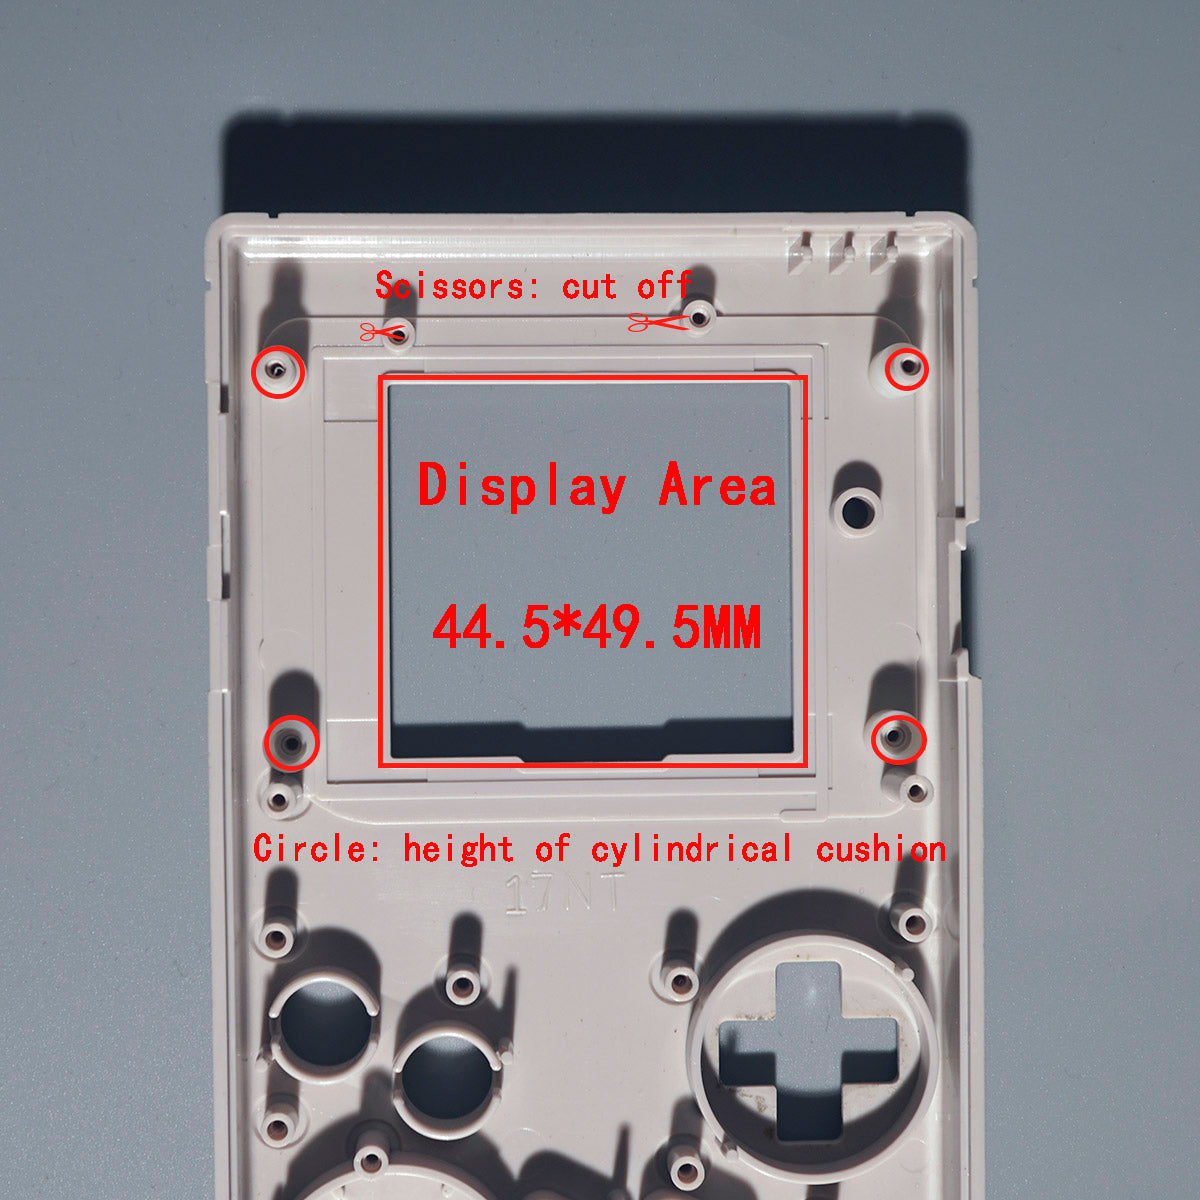 FunnyPlaying Game Boy Color Retro Pixel IPS Shell